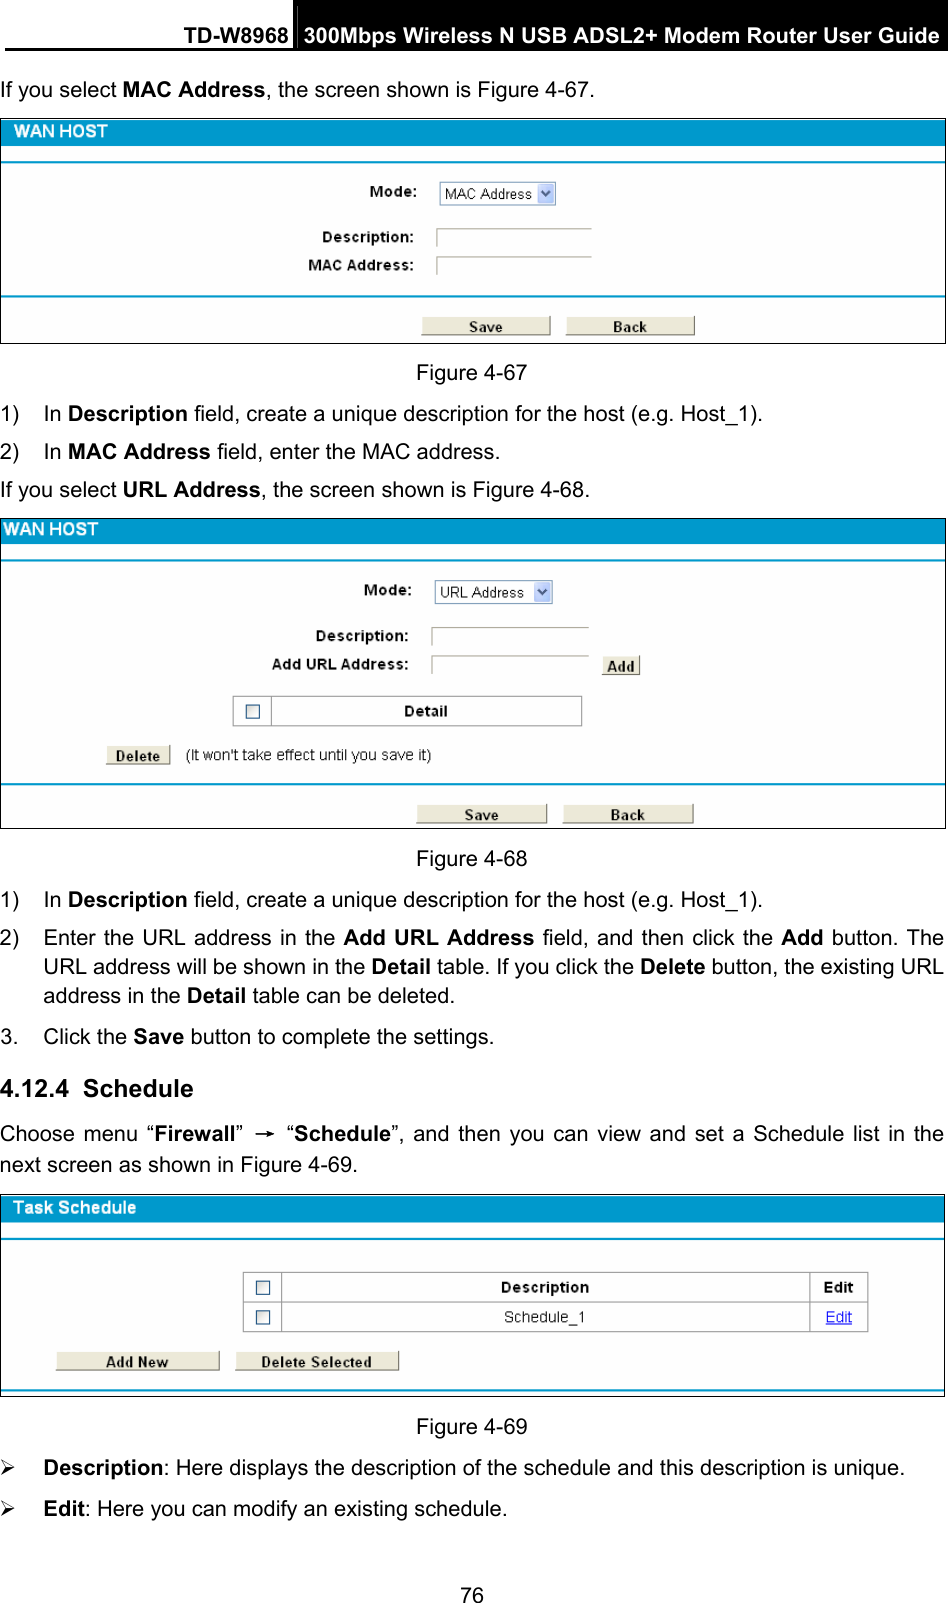 TD-W8968  300Mbps Wireless N USB ADSL2+ Modem Router User Guide 76 If you select MAC Address, the screen shown is Figure 4-67.  Figure 4-67 1) In Description field, create a unique description for the host (e.g. Host_1).   2) In MAC Address field, enter the MAC address. If you select URL Address, the screen shown is Figure 4-68.  Figure 4-68 1) In Description field, create a unique description for the host (e.g. Host_1). 2)  Enter the URL address in the Add URL Address field, and then click the Add button. The URL address will be shown in the Detail table. If you click the Delete button, the existing URL address in the Detail table can be deleted. 3. Click the Save button to complete the settings. 4.12.4  Schedule Choose menu “Firewall” → “Schedule”, and then you can view and set a Schedule list in the next screen as shown in Figure 4-69.  Figure 4-69 ¾ Description: Here displays the description of the schedule and this description is unique.   ¾ Edit: Here you can modify an existing schedule.   